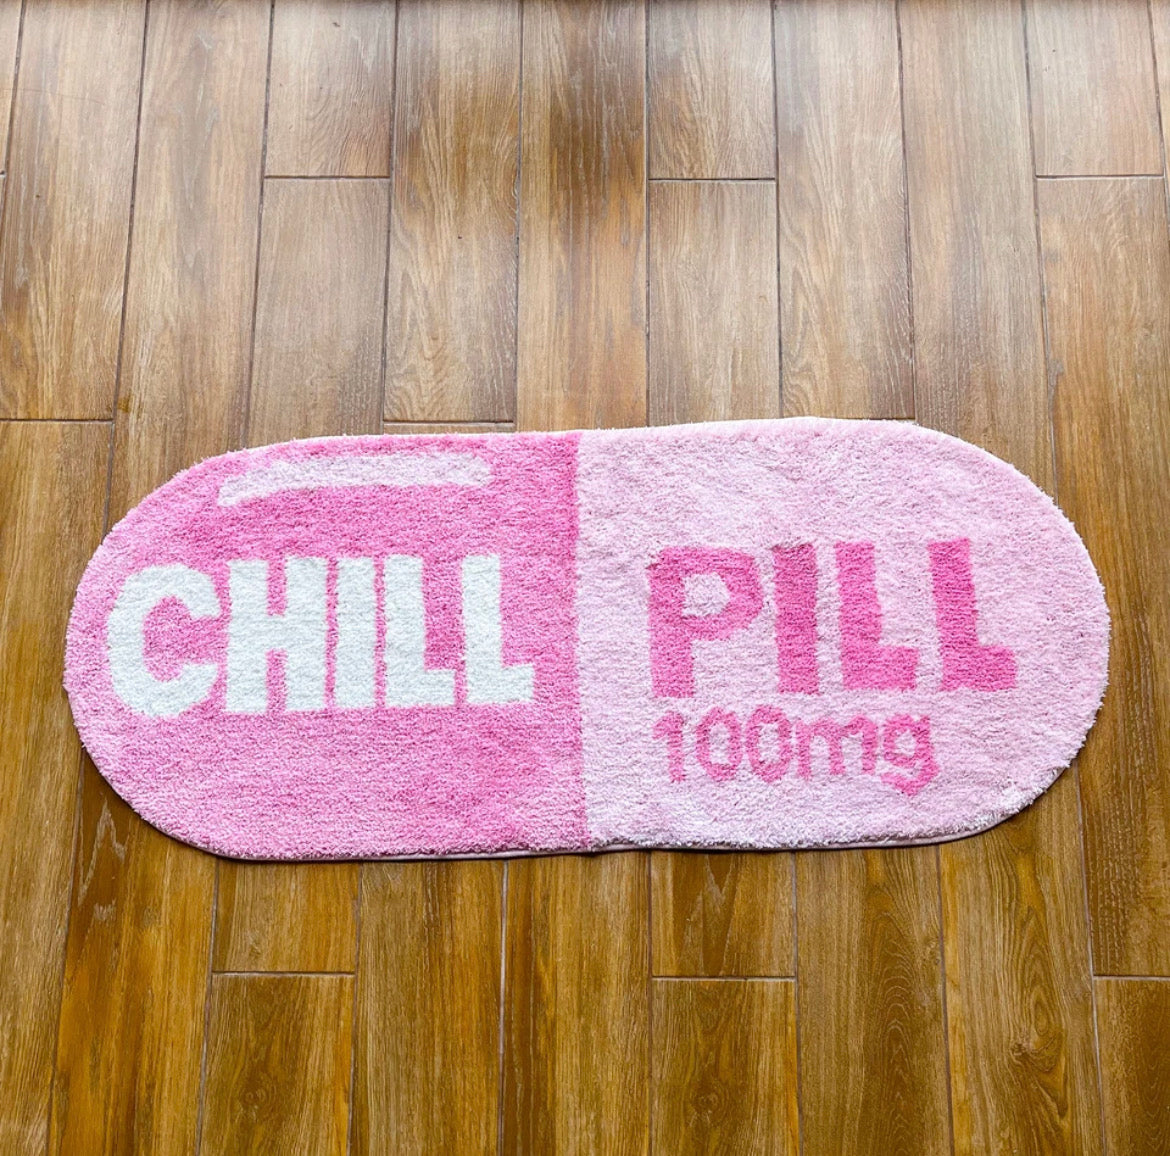 Pink chill pill rug